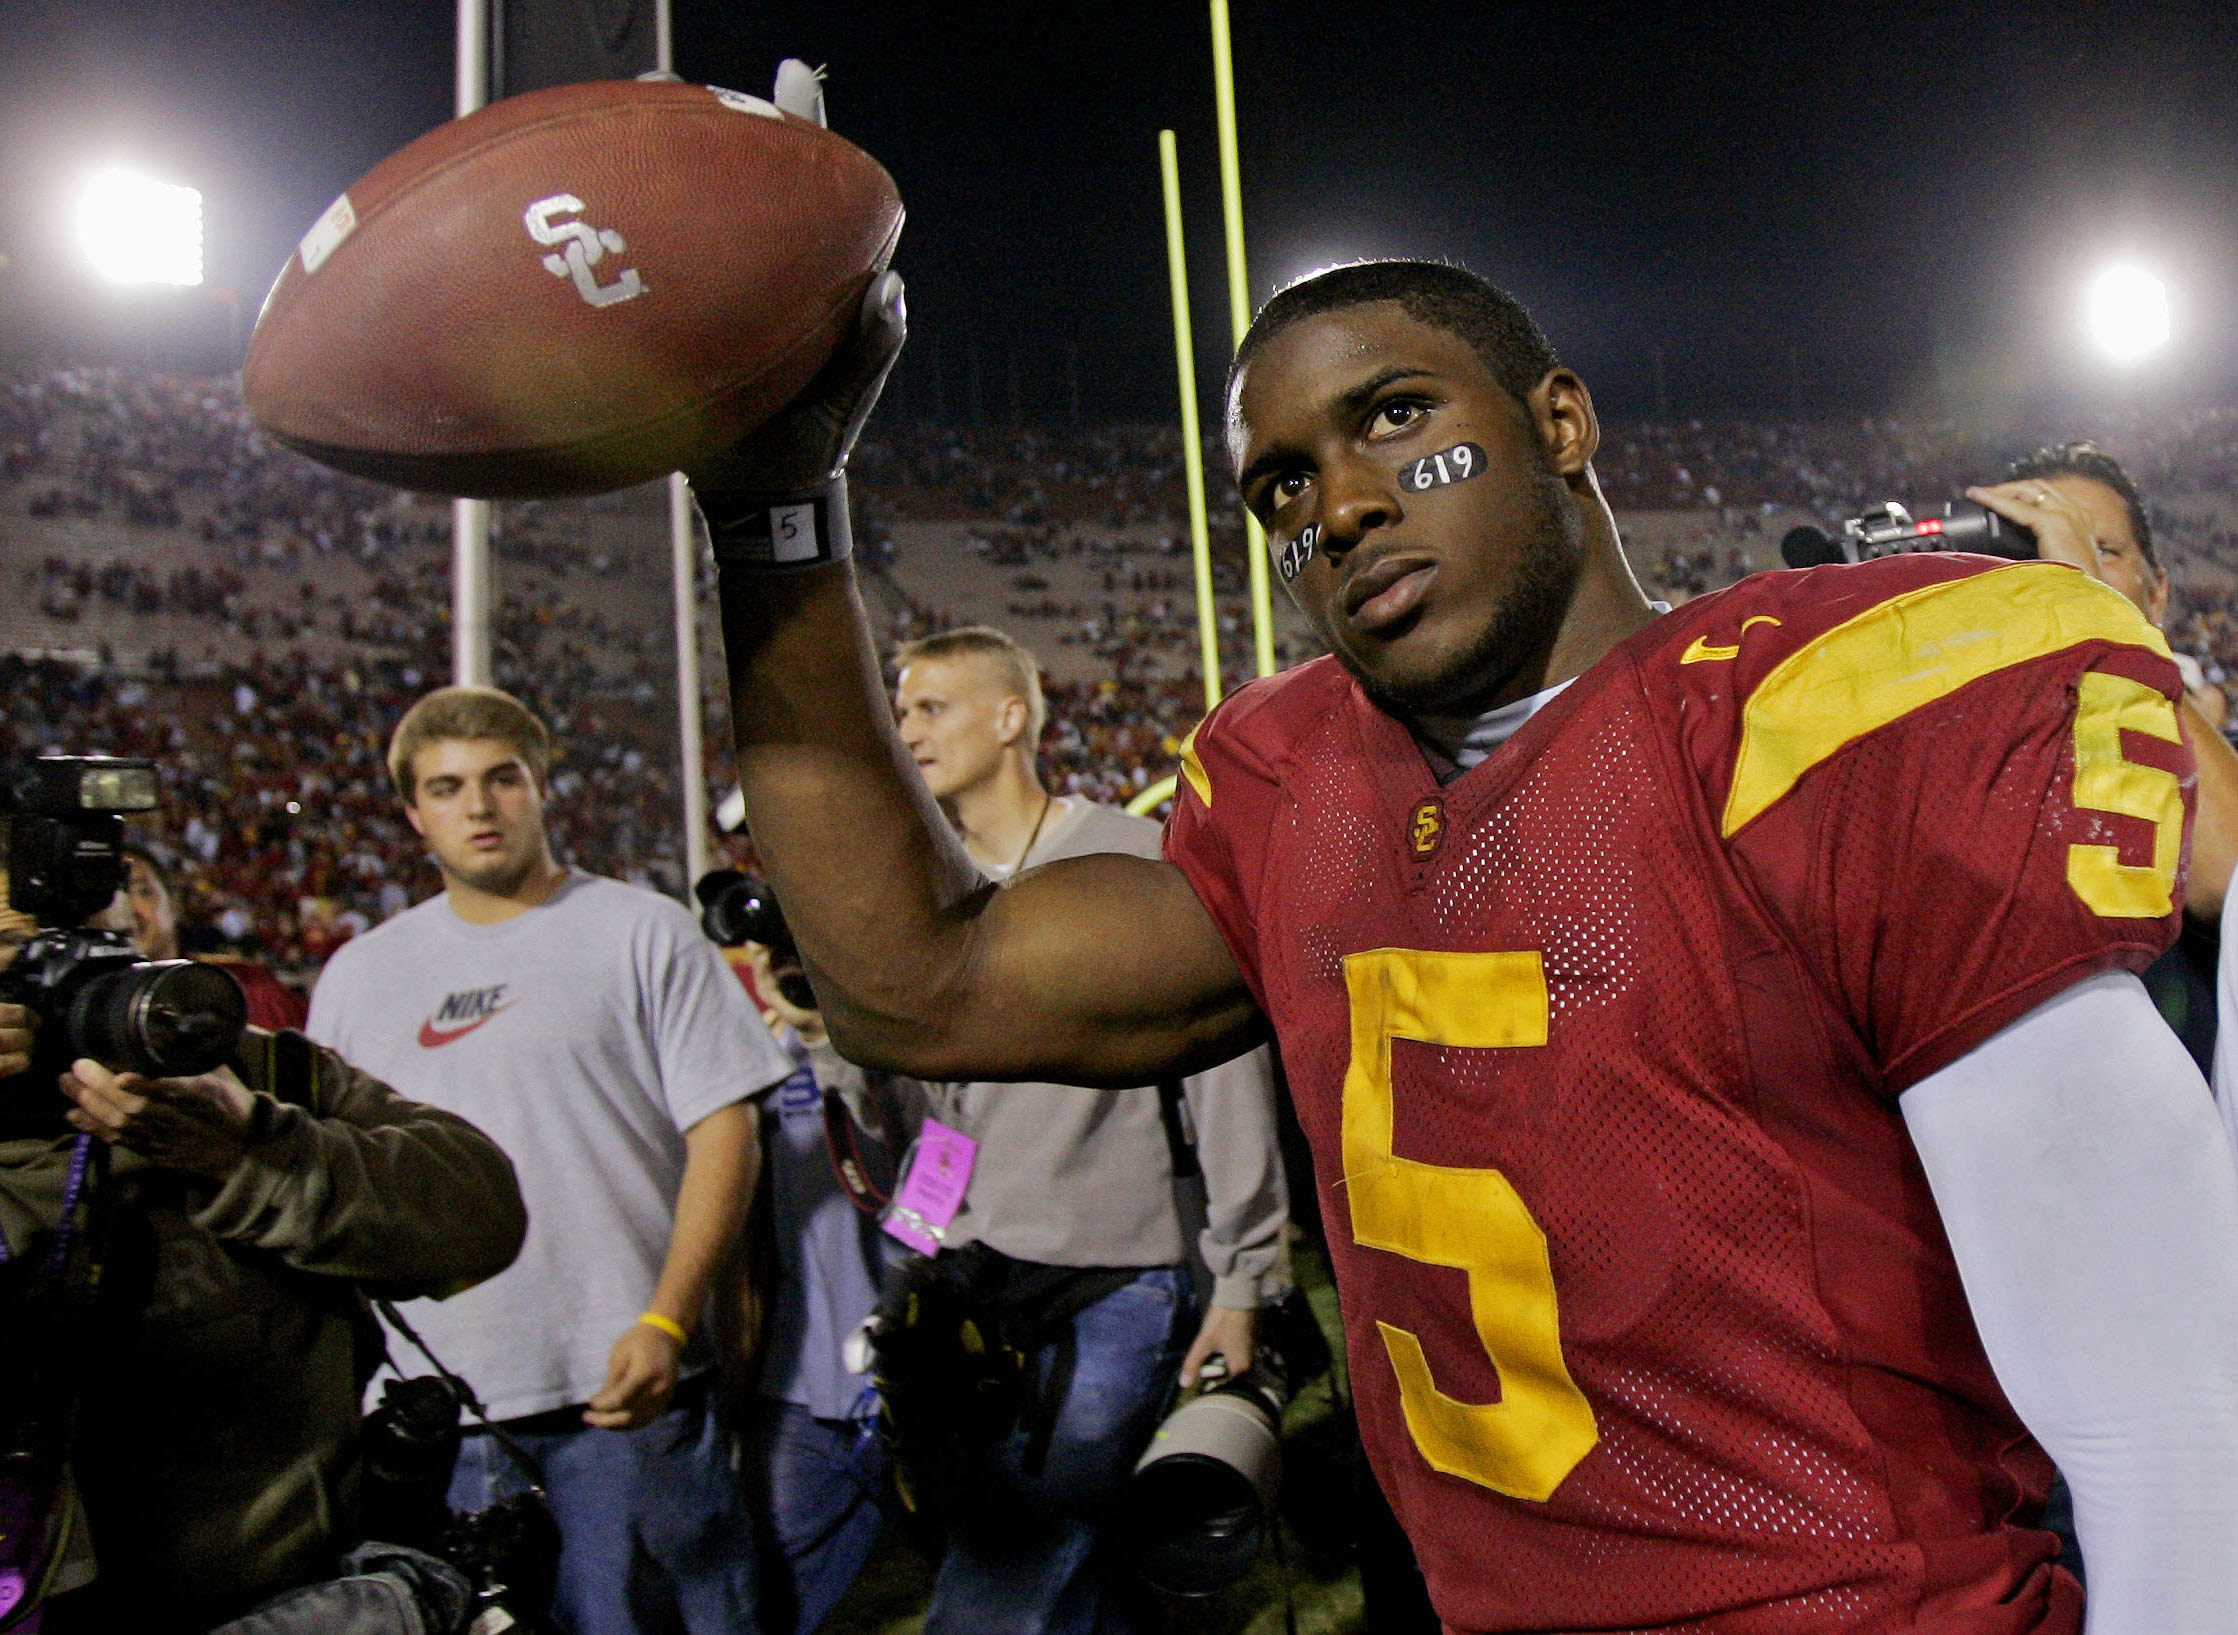 Letters to the Editor: The unsettling reason for returning Reggie Bush's Heisman Trophy